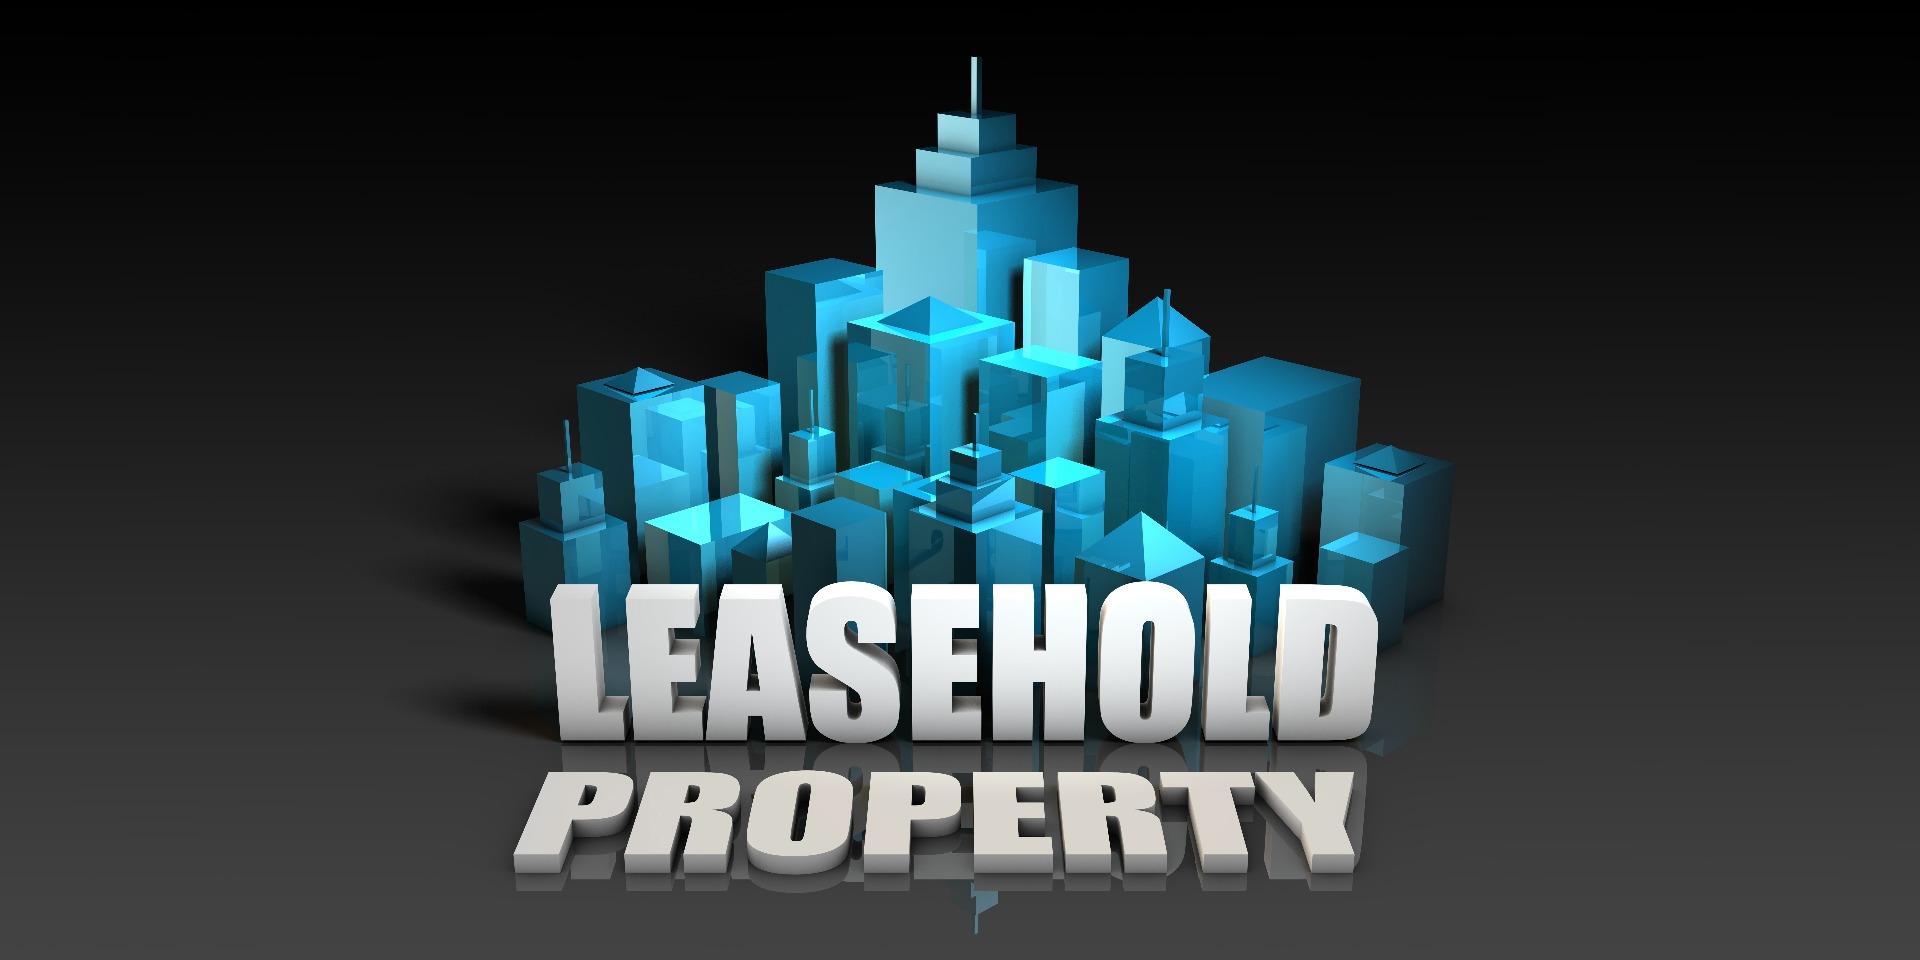 A number of commercial and leasehold properties with 'Leasehold Property' in lettering in front of them.